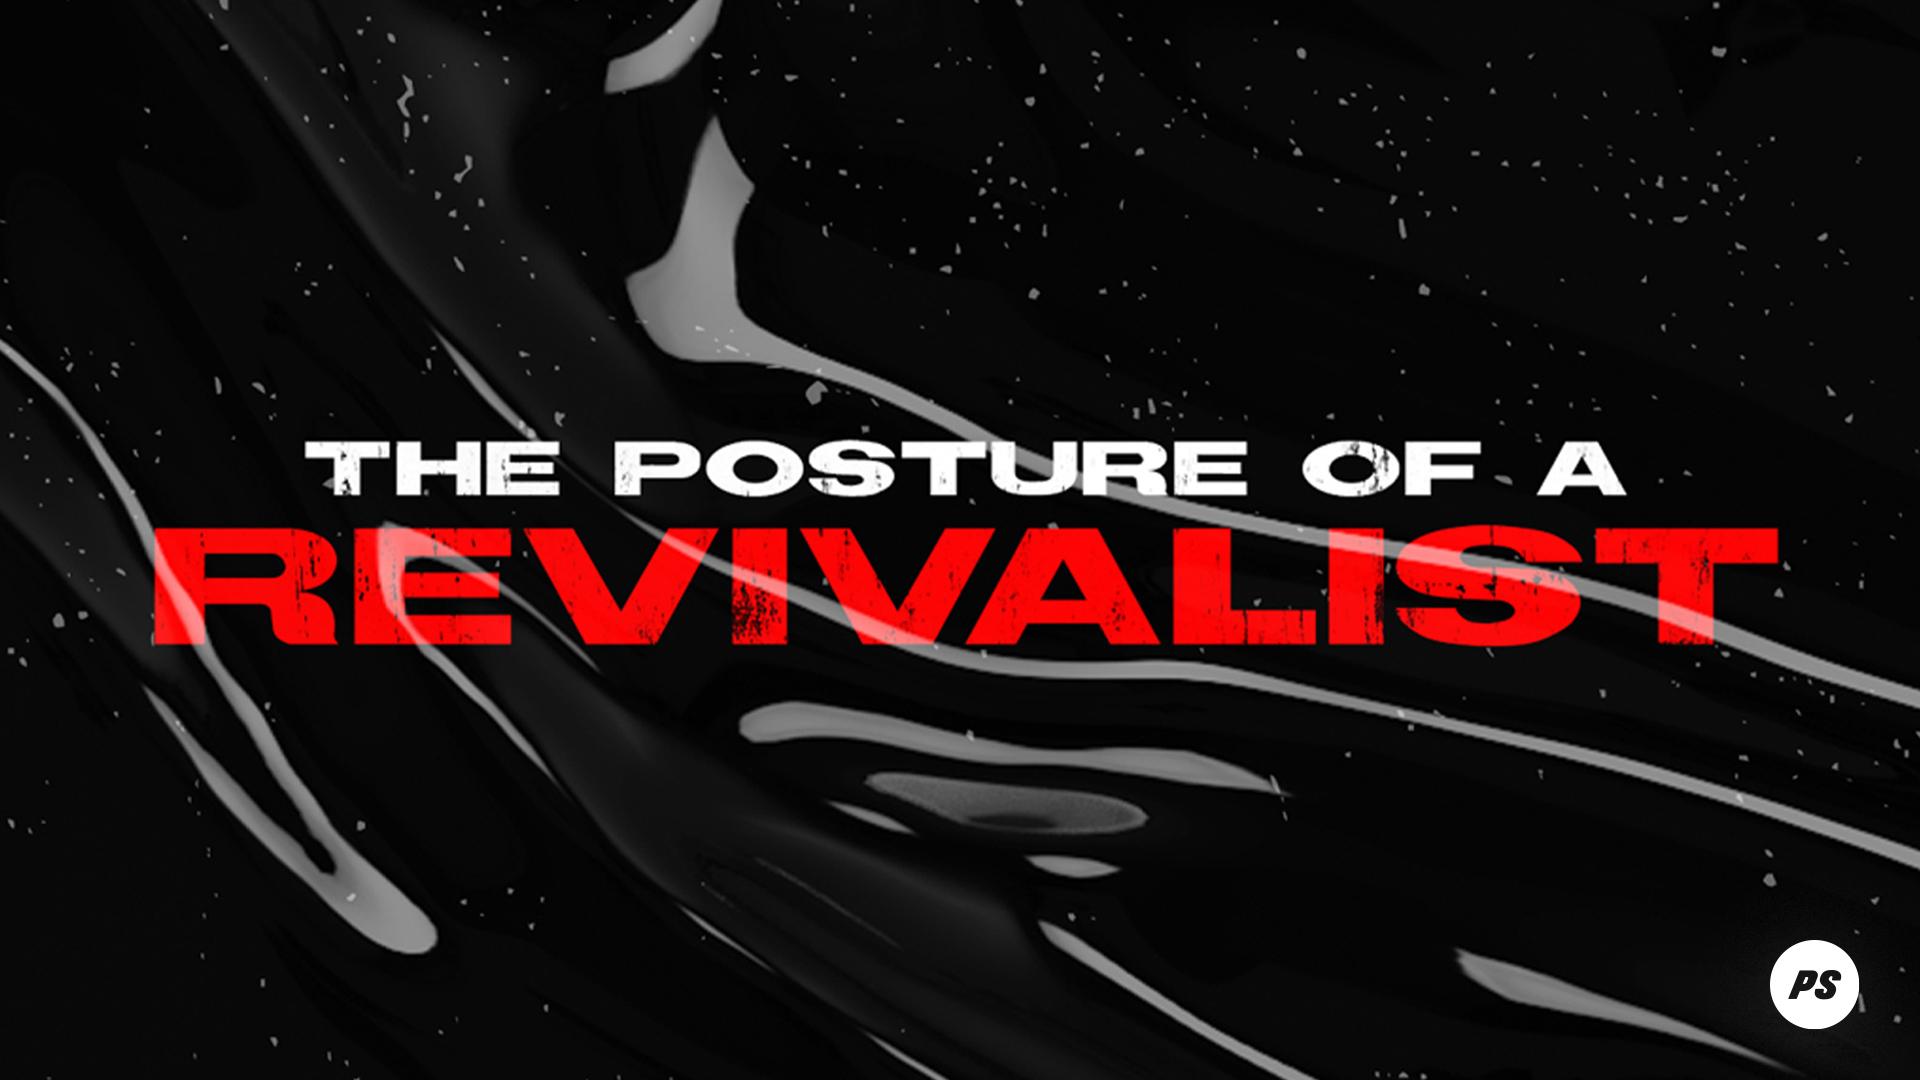 Featured Image for “The posture of a revivalist”